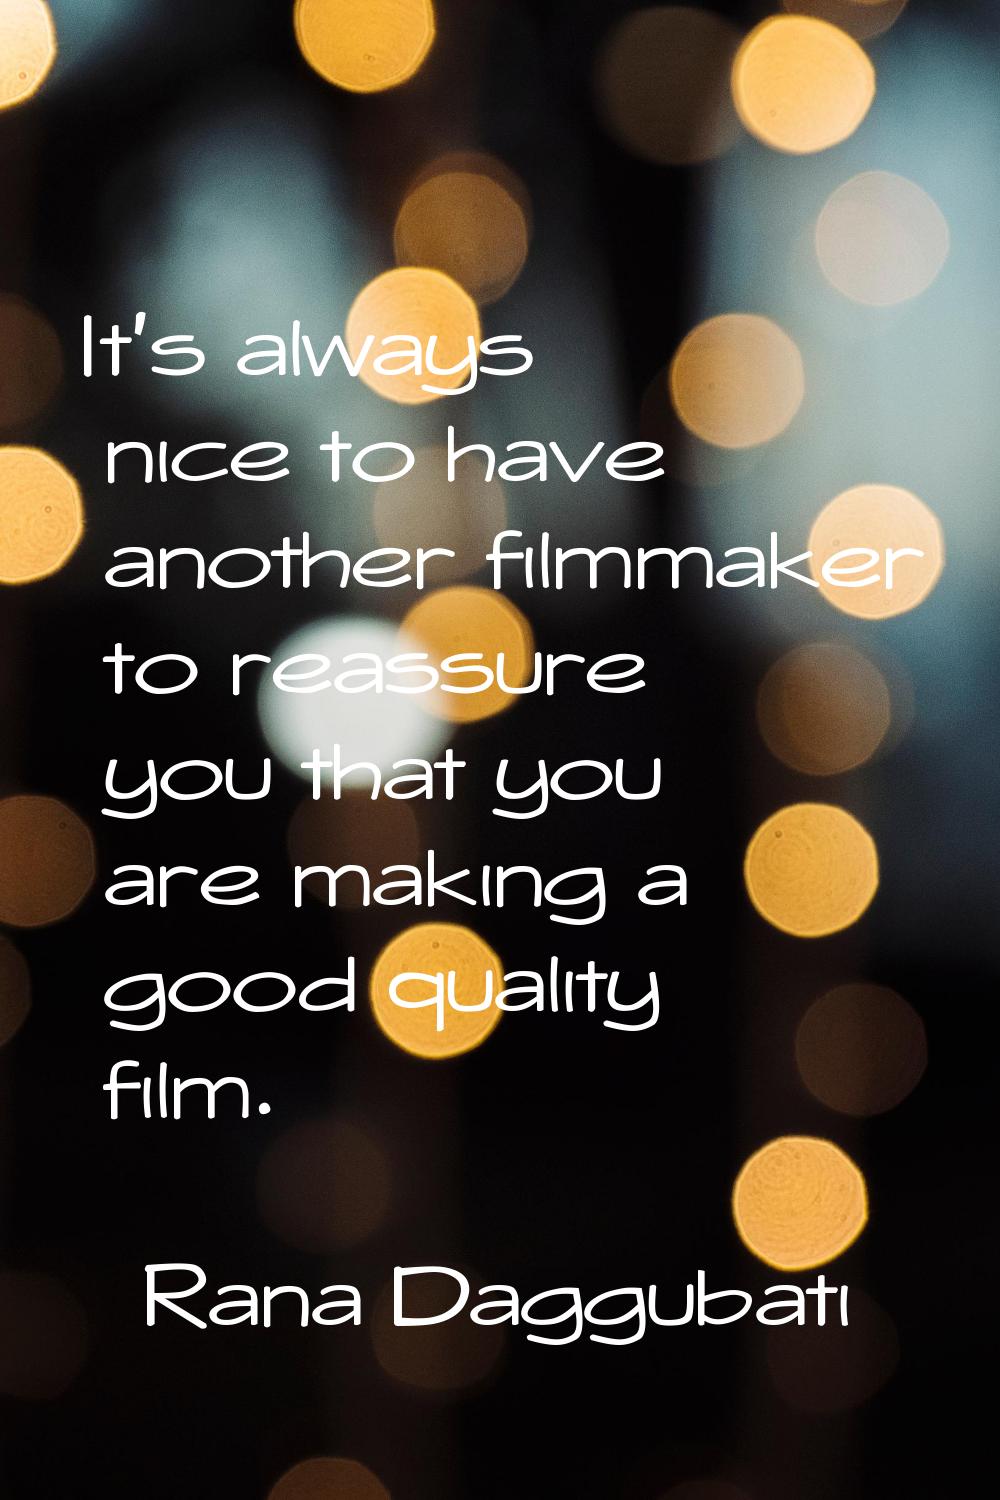 It's always nice to have another filmmaker to reassure you that you are making a good quality film.